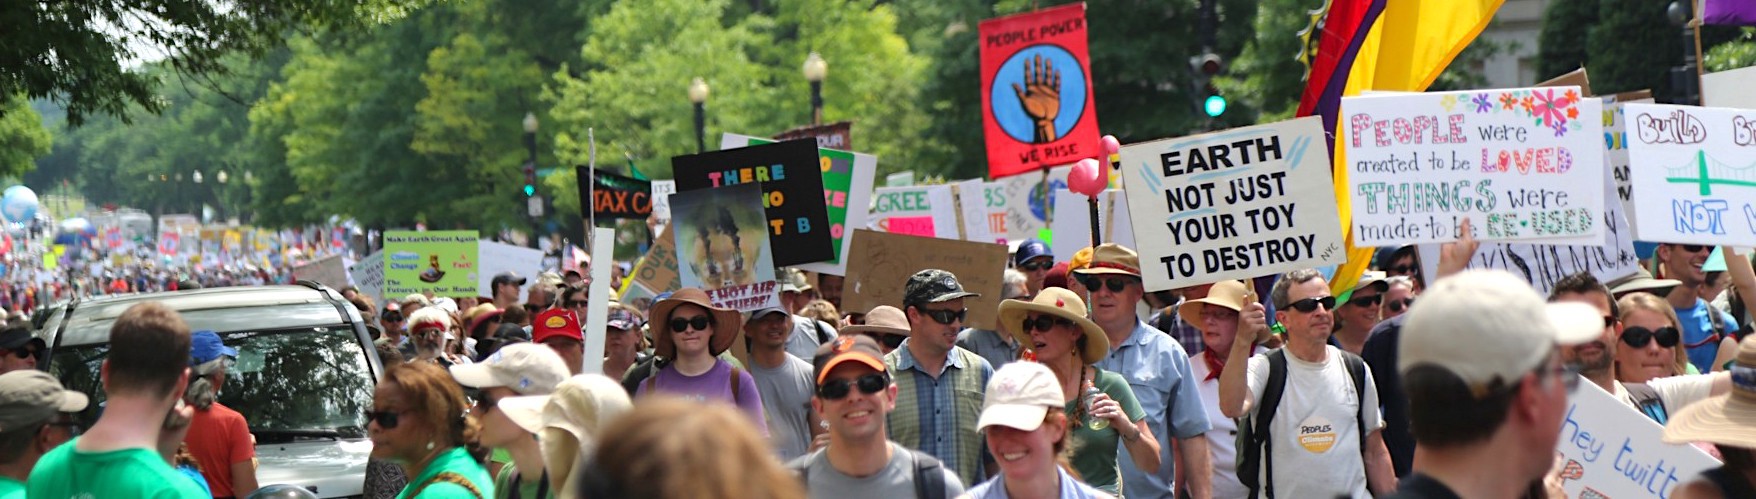 The People’s Climate March in Washington, DC